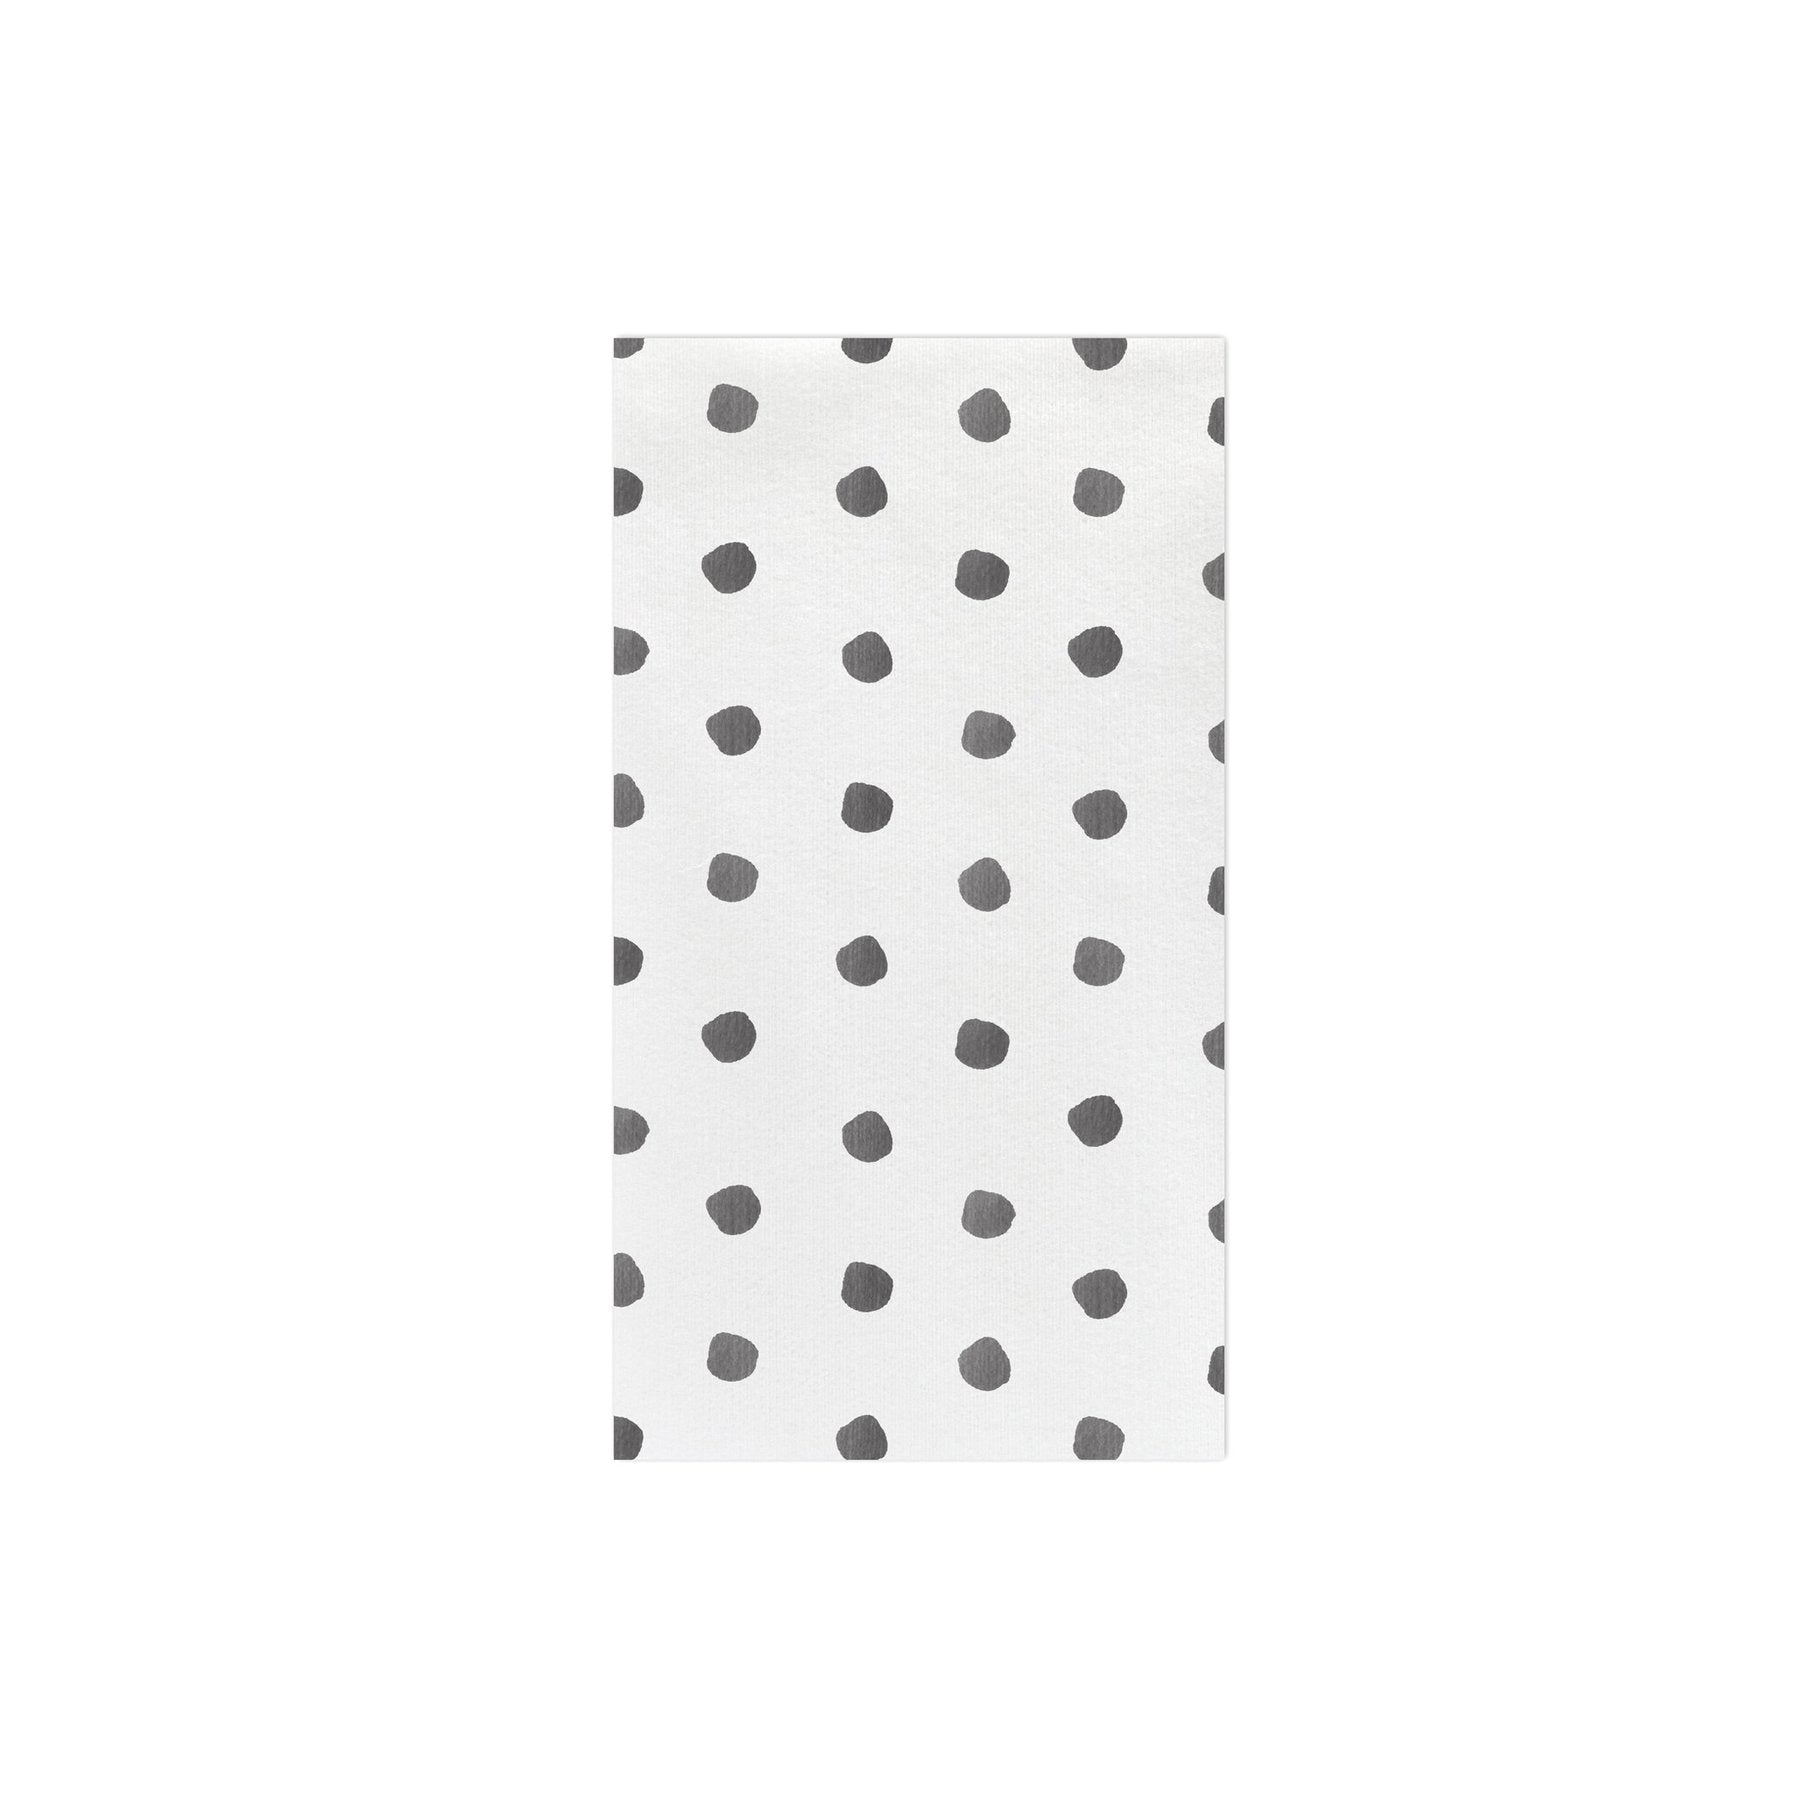 Papersoft Napkins Grey Dot Guest Towels - Pack of 20